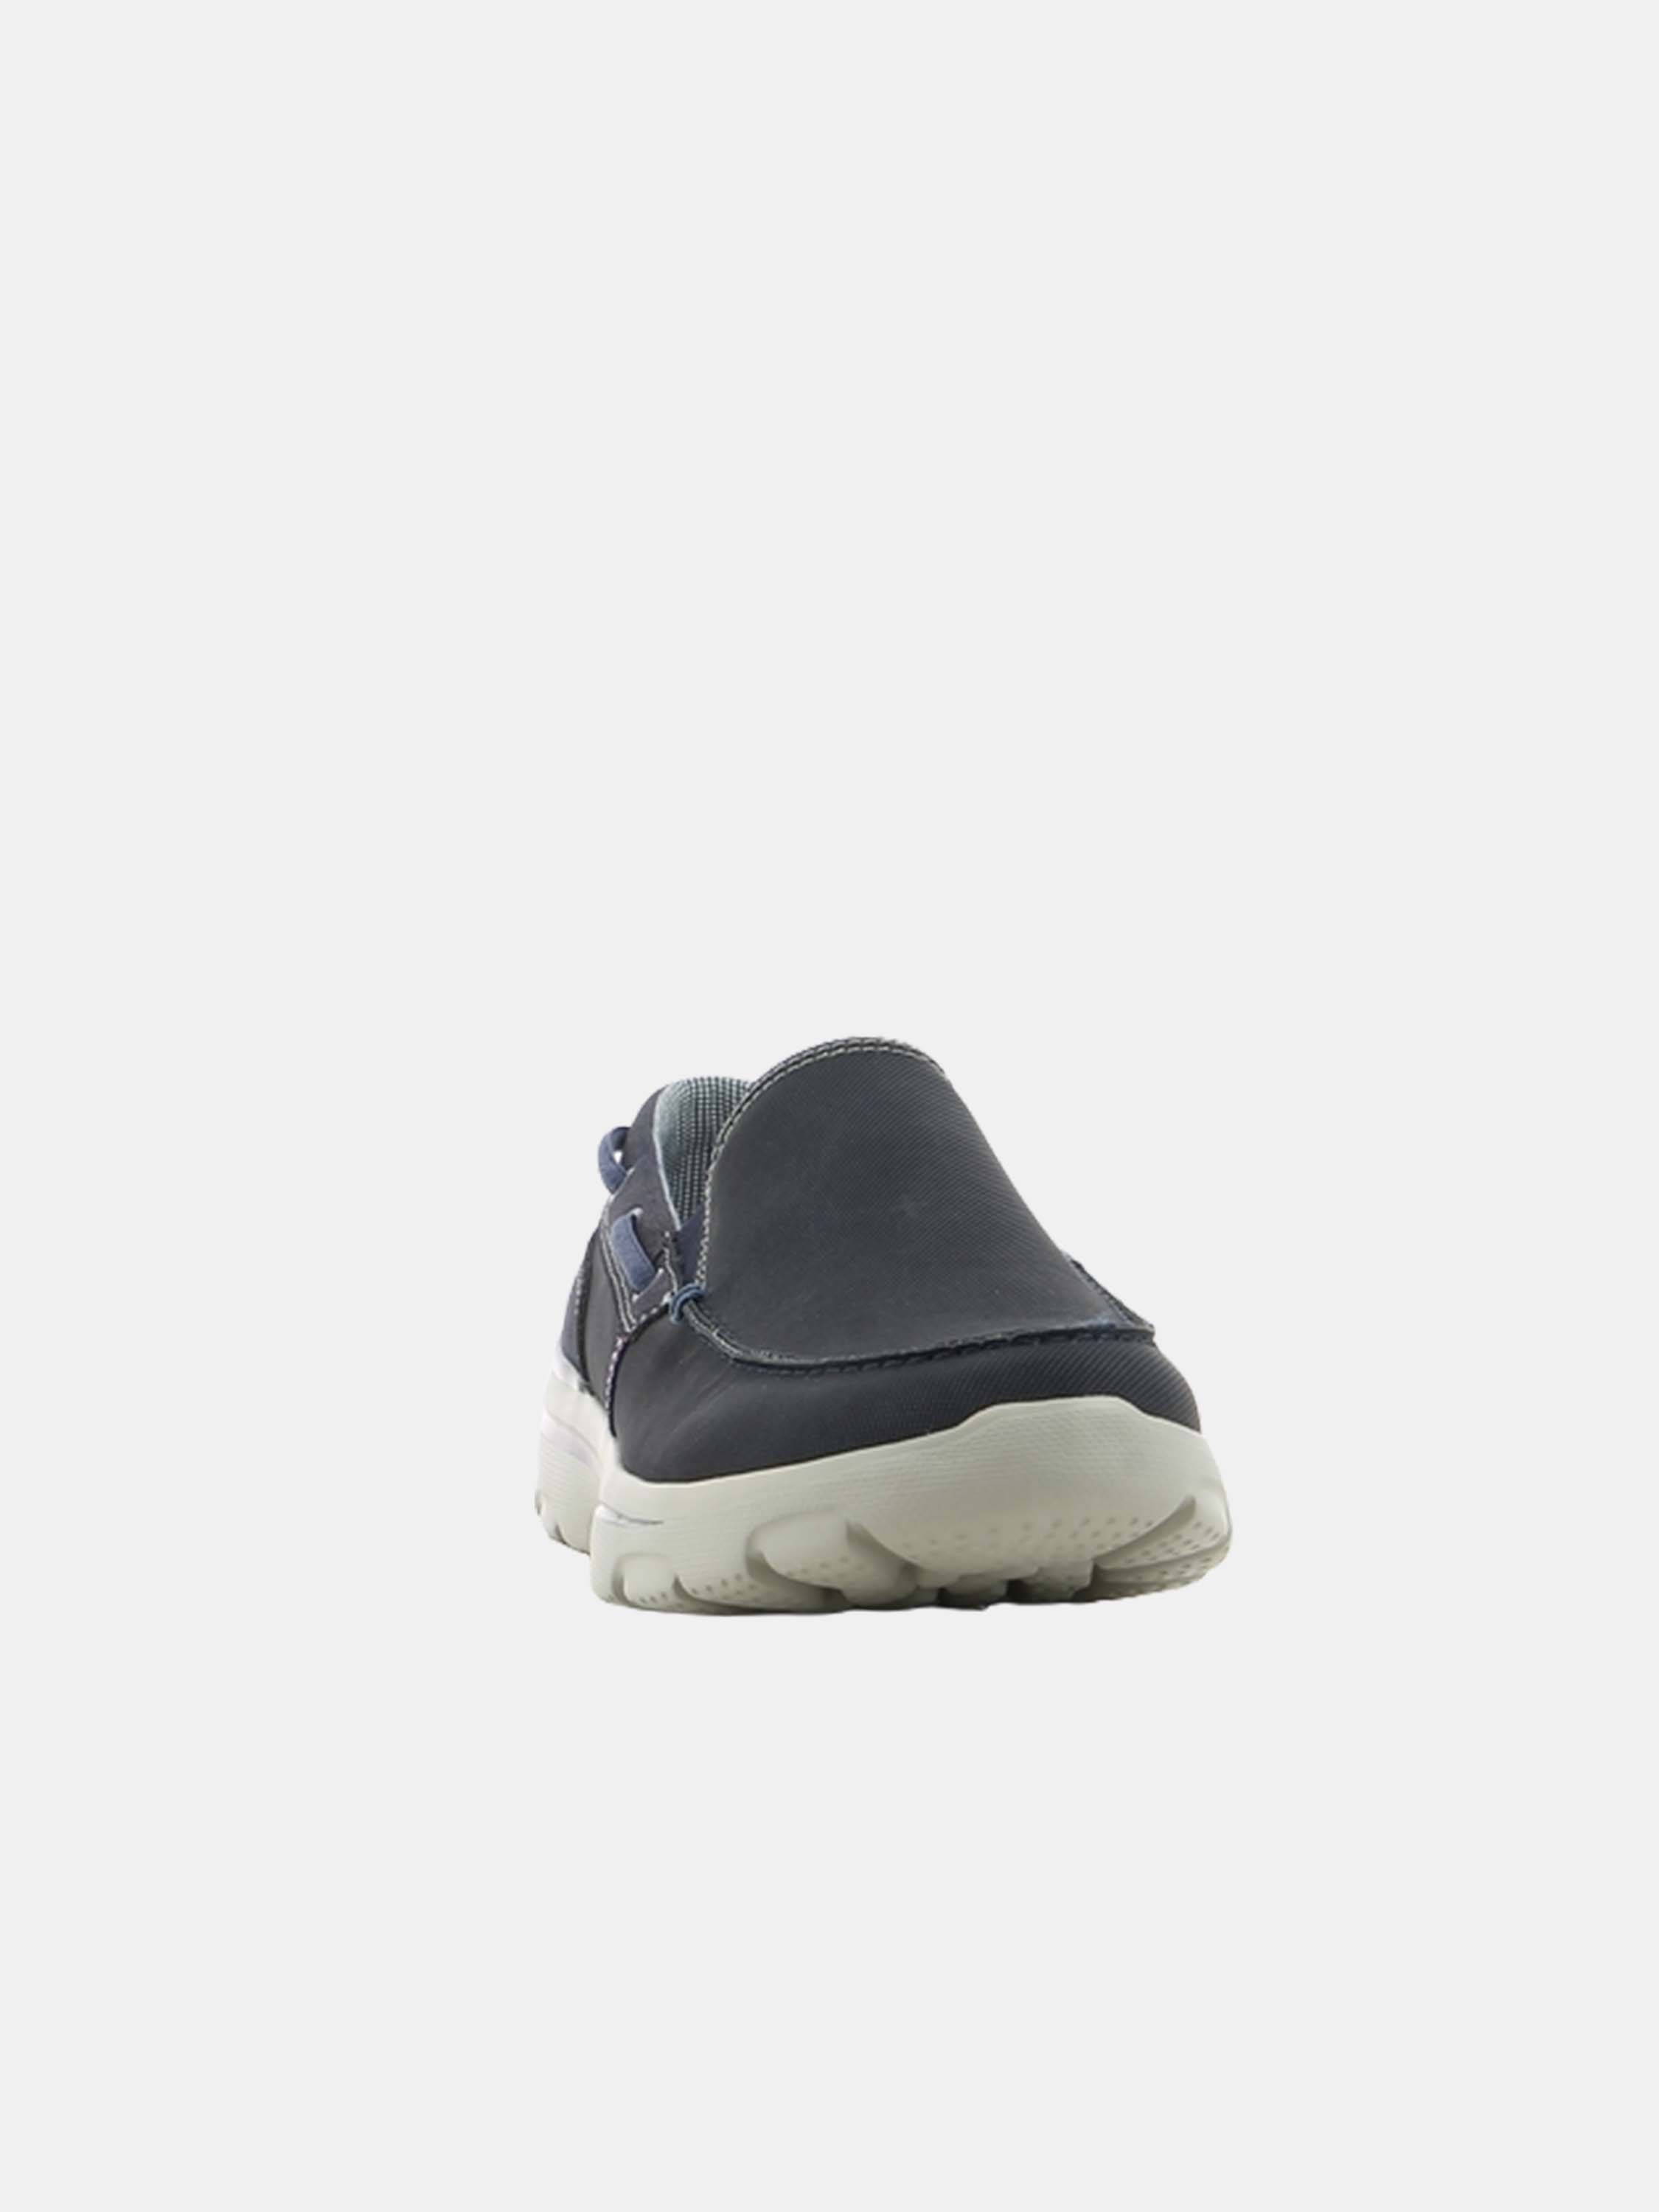 Sprox Men's Navy Slip On Shoes #color_Navy